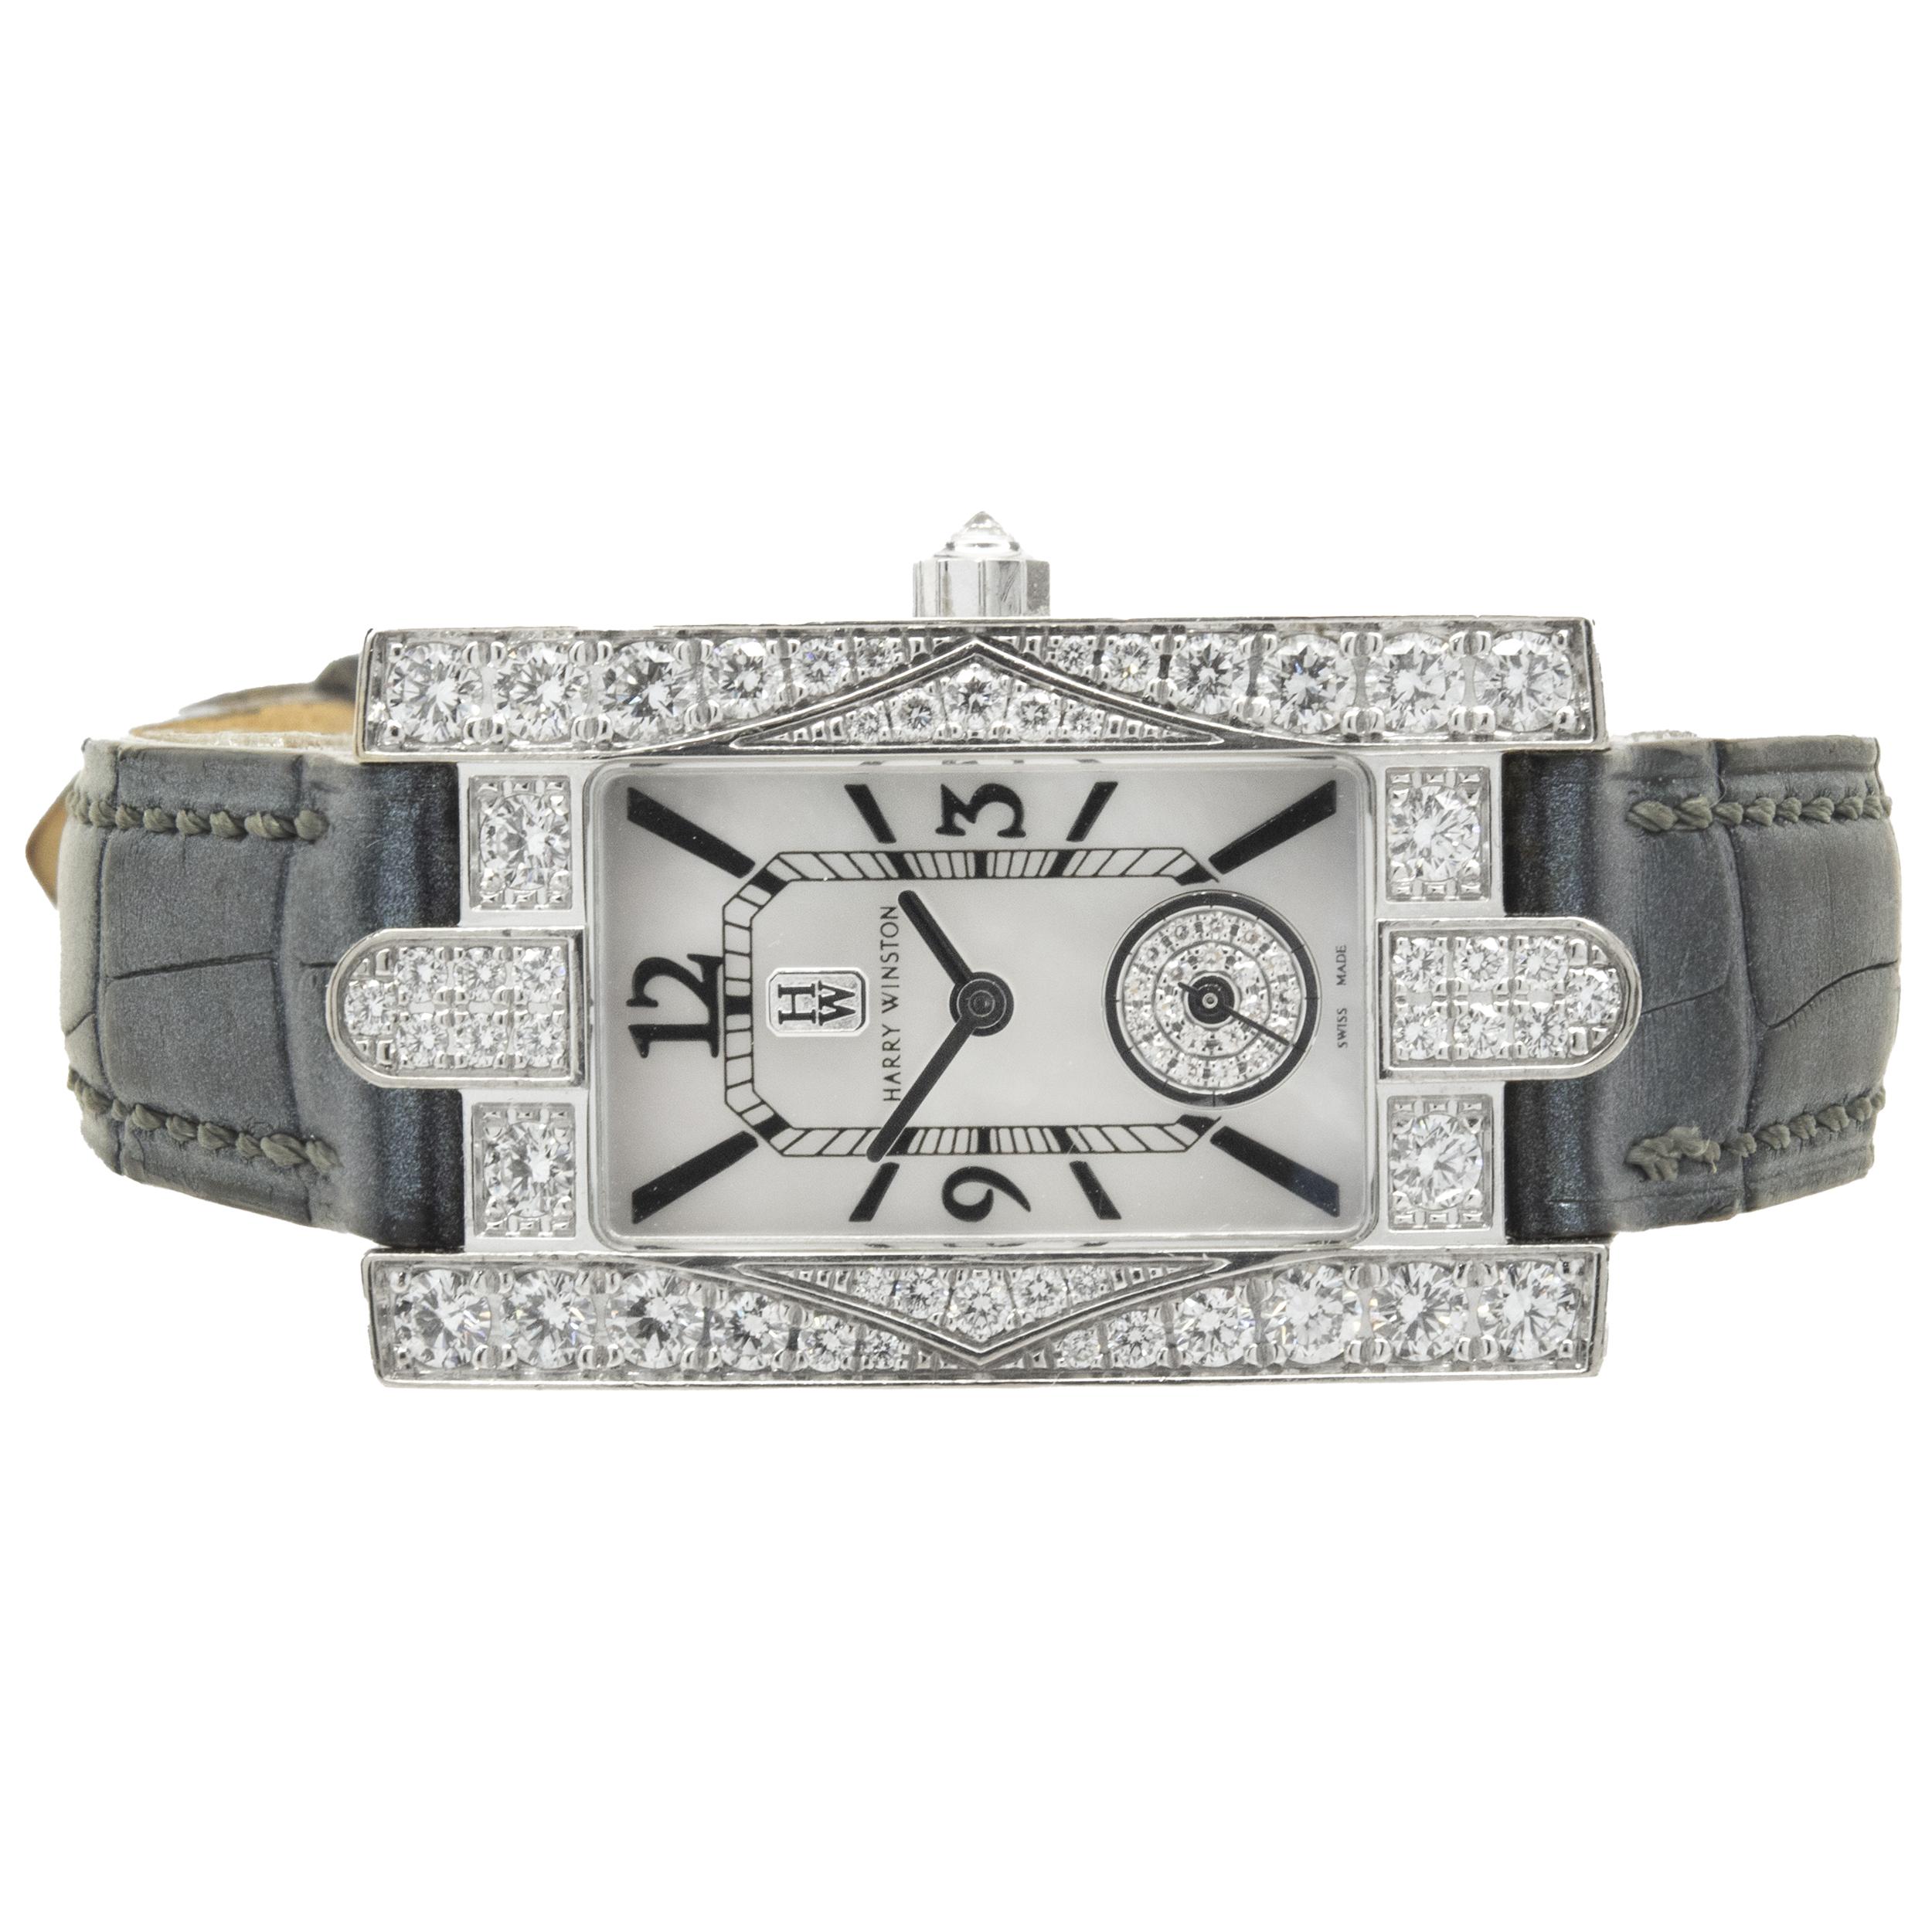 Movement: quartz
Function: hours, minutes, seconds 
Dial: mother of pearl diamond dial
Serial # No. 4XXX
Reference # AVEQHM21WW231
Measurement: watch will fit up to a 7-inch wrist

Complete with box, no papers
Guaranteed to be authentic by seller.
